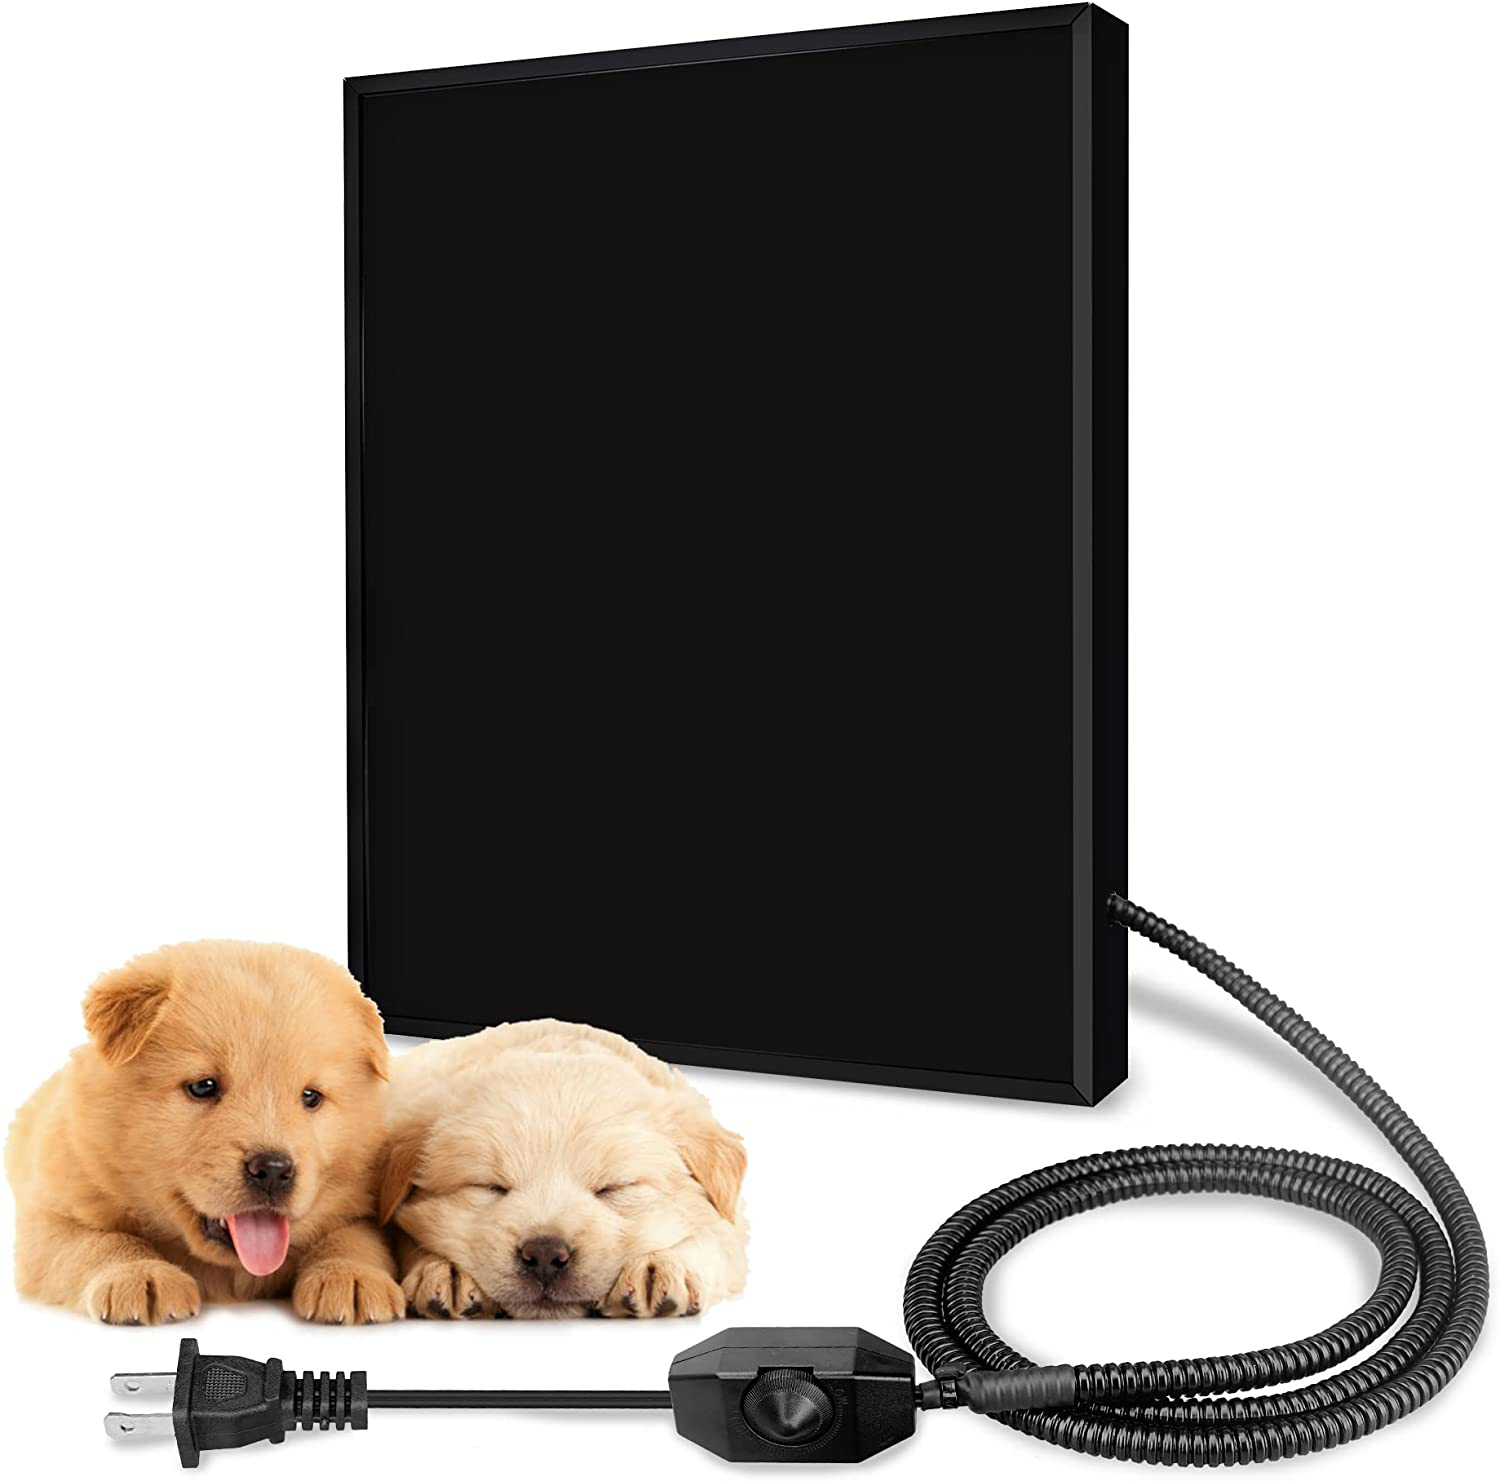 Dog House Heater with anti Bite Cord, Adjustable Radiant Heat Flat Panel Heater for Pets Animals, Black